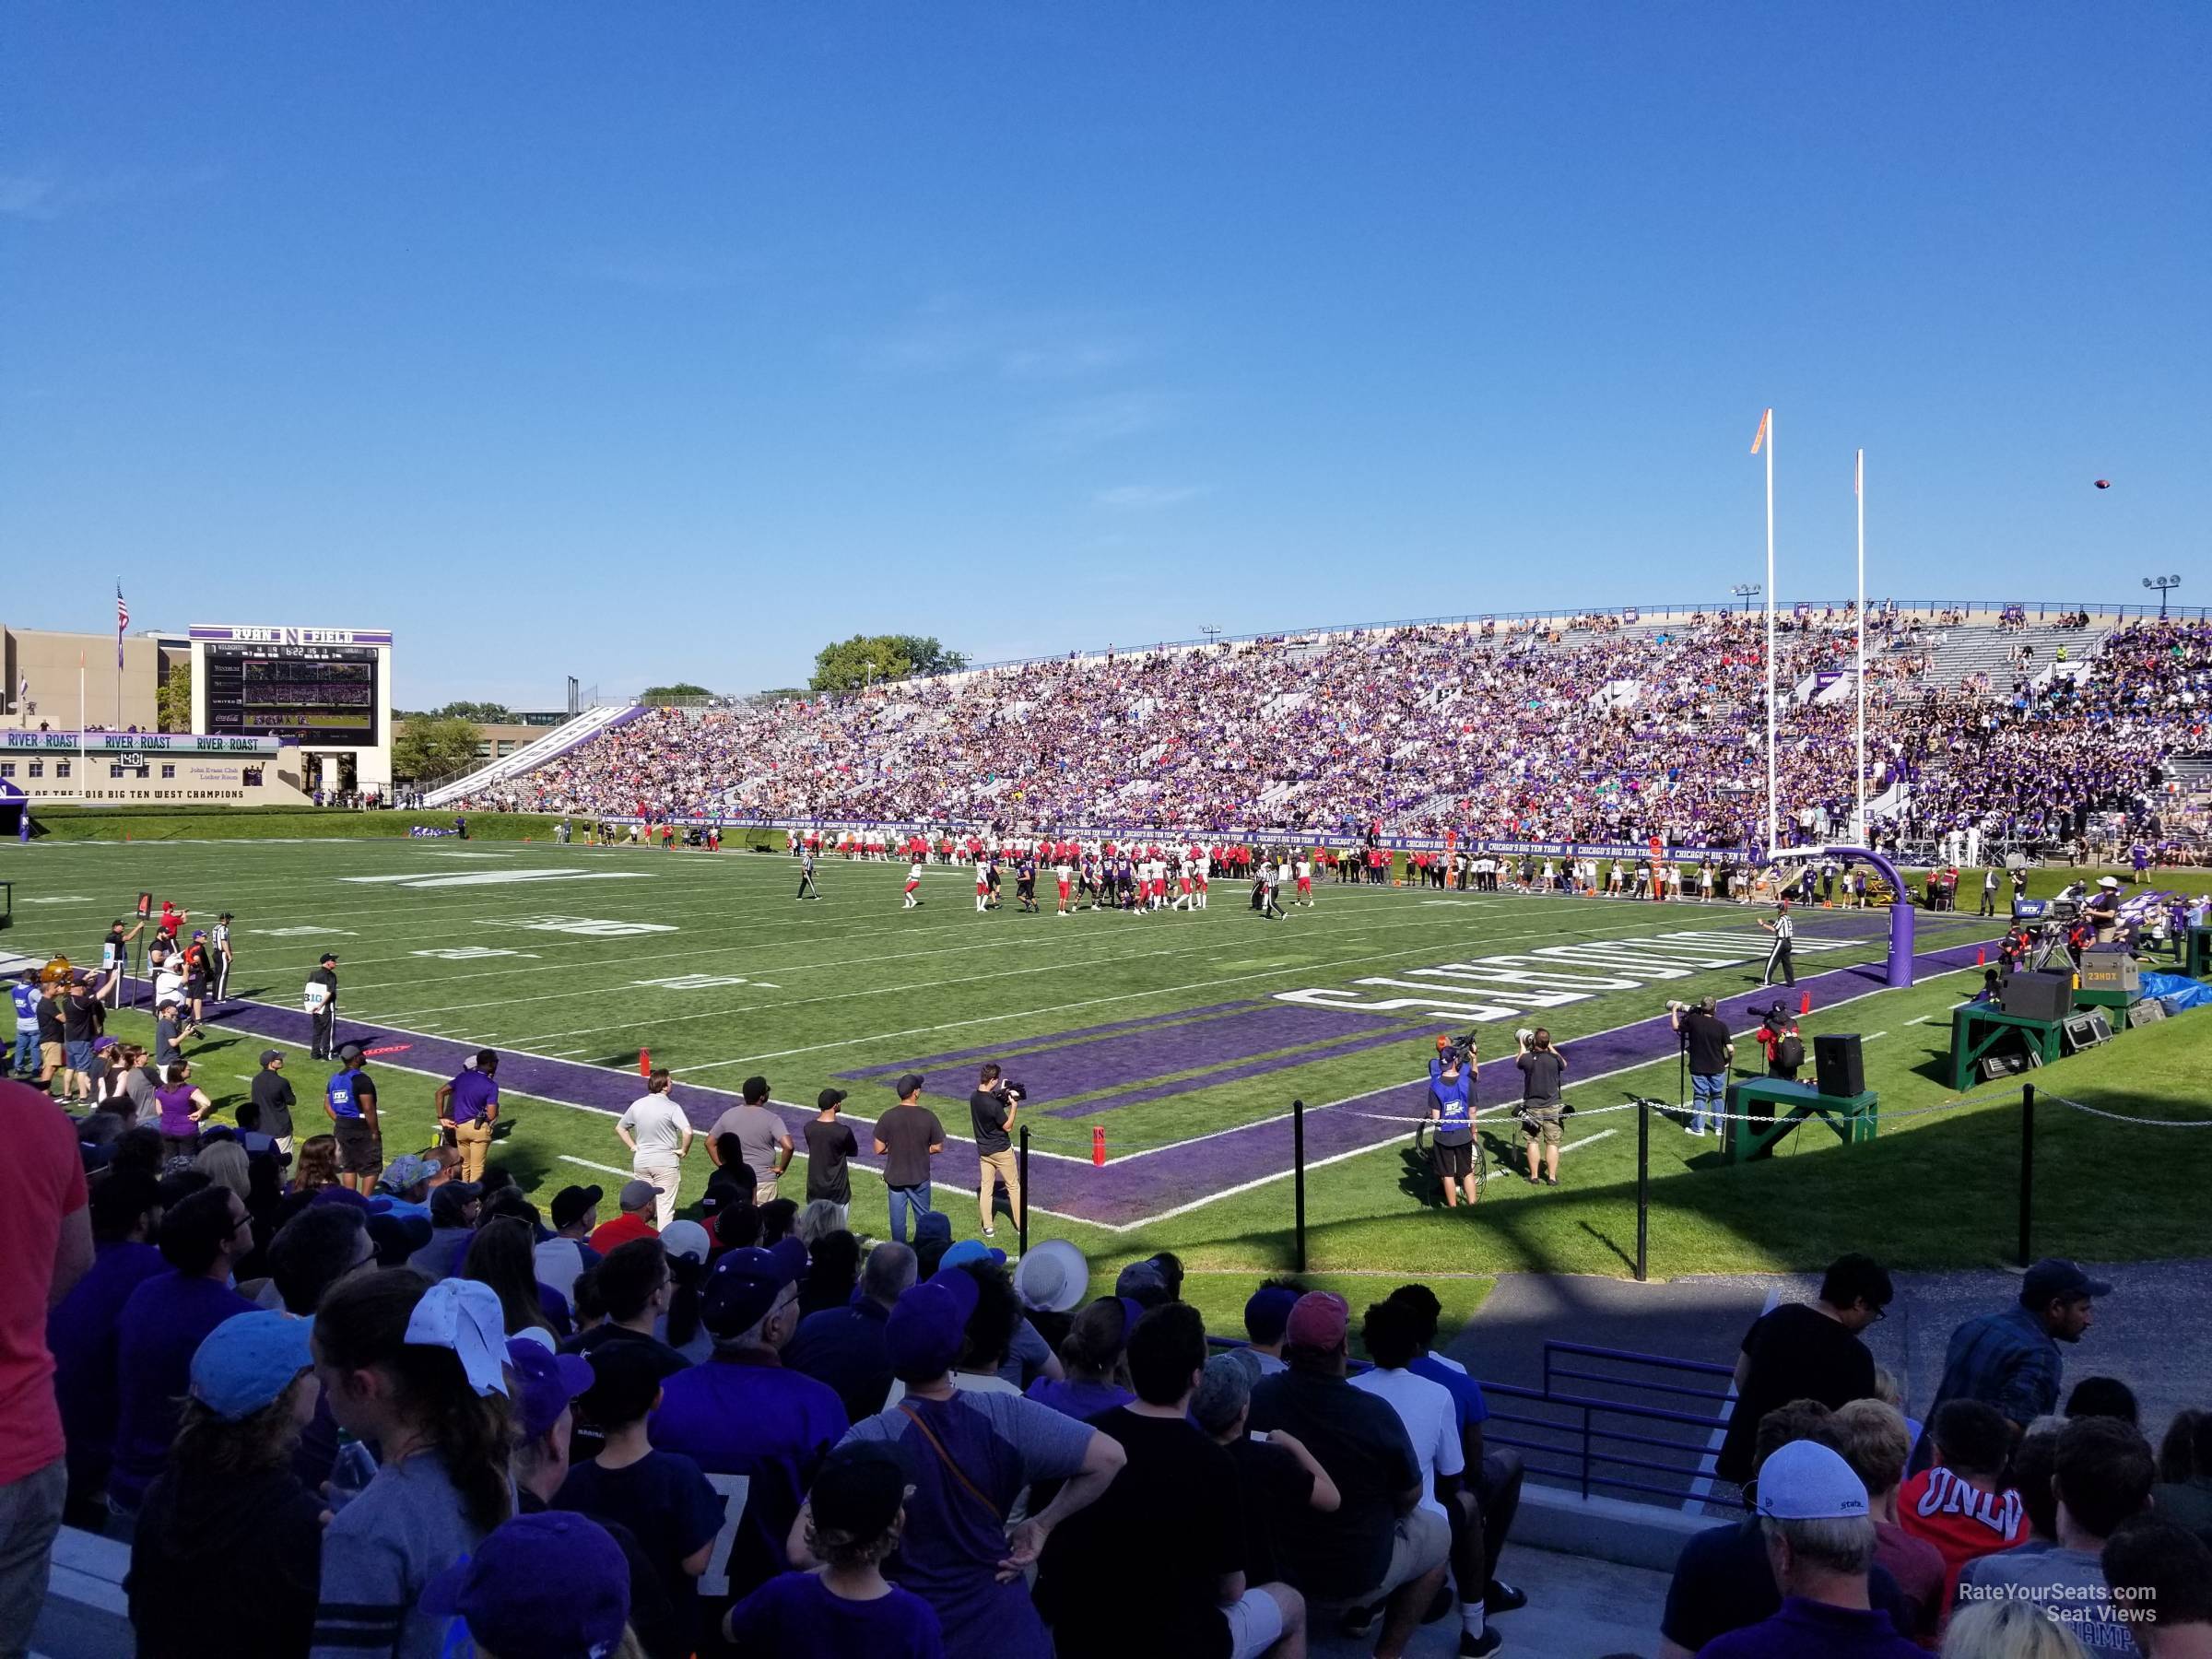 section 123, row 11 seat view  - ryan field